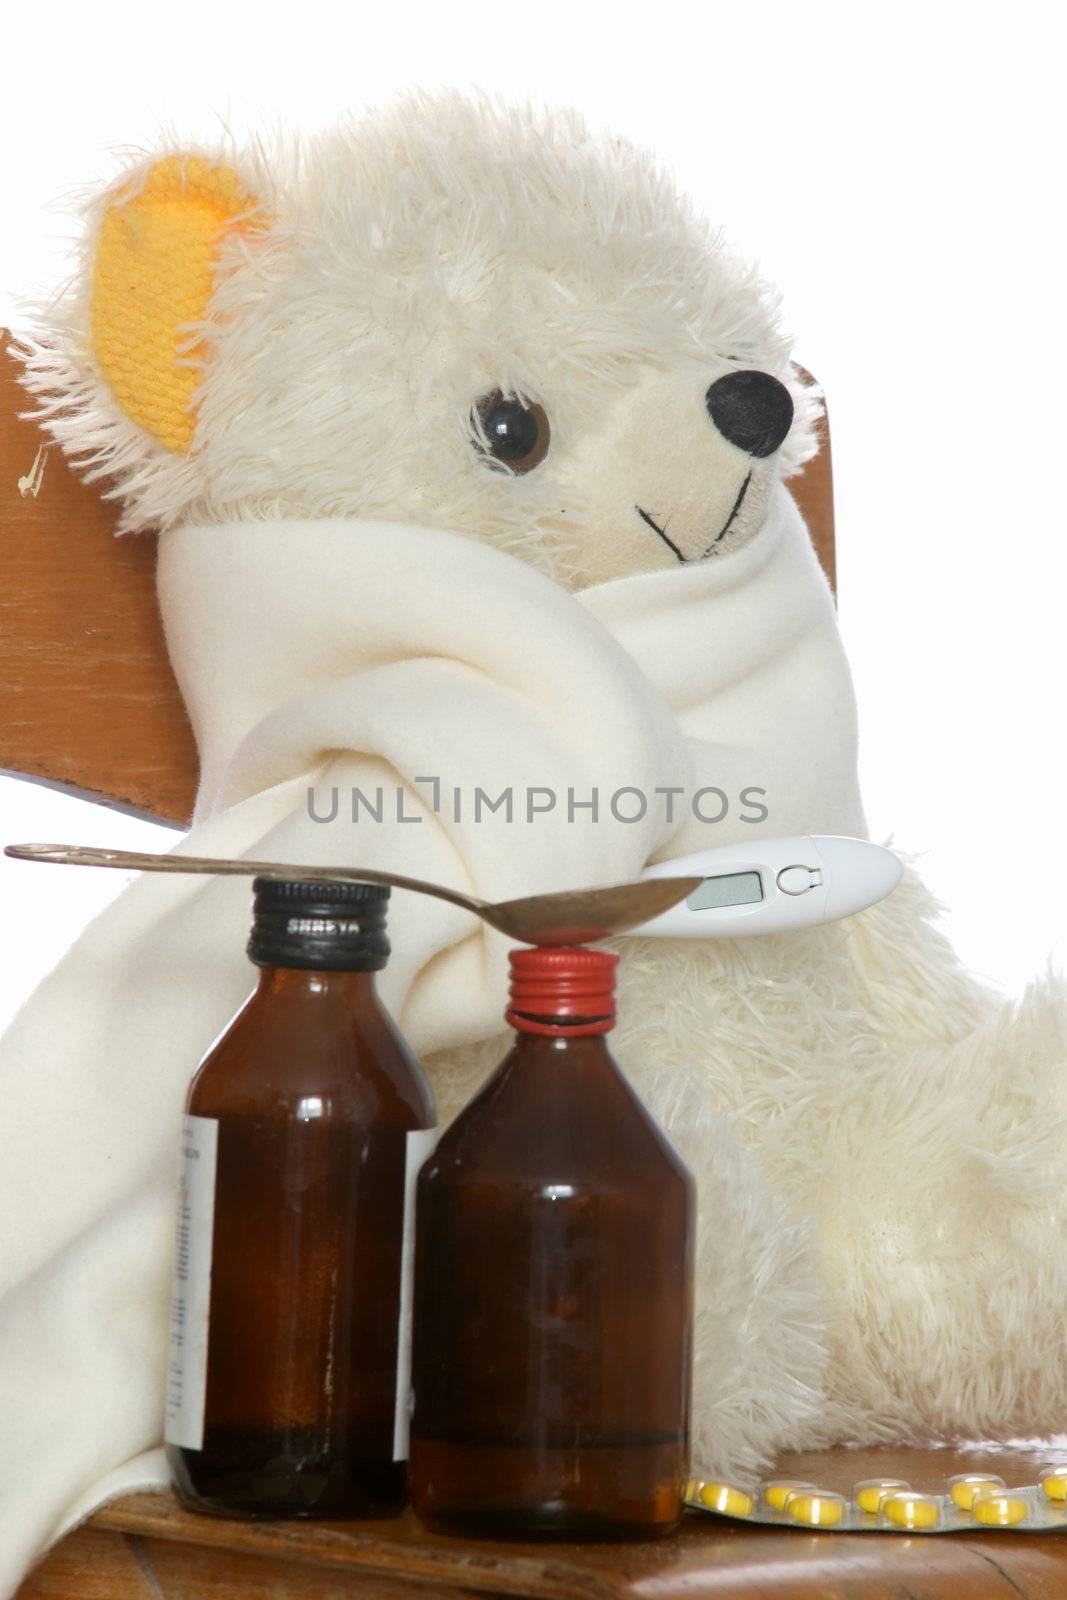 Toy white bear sitting on a chair